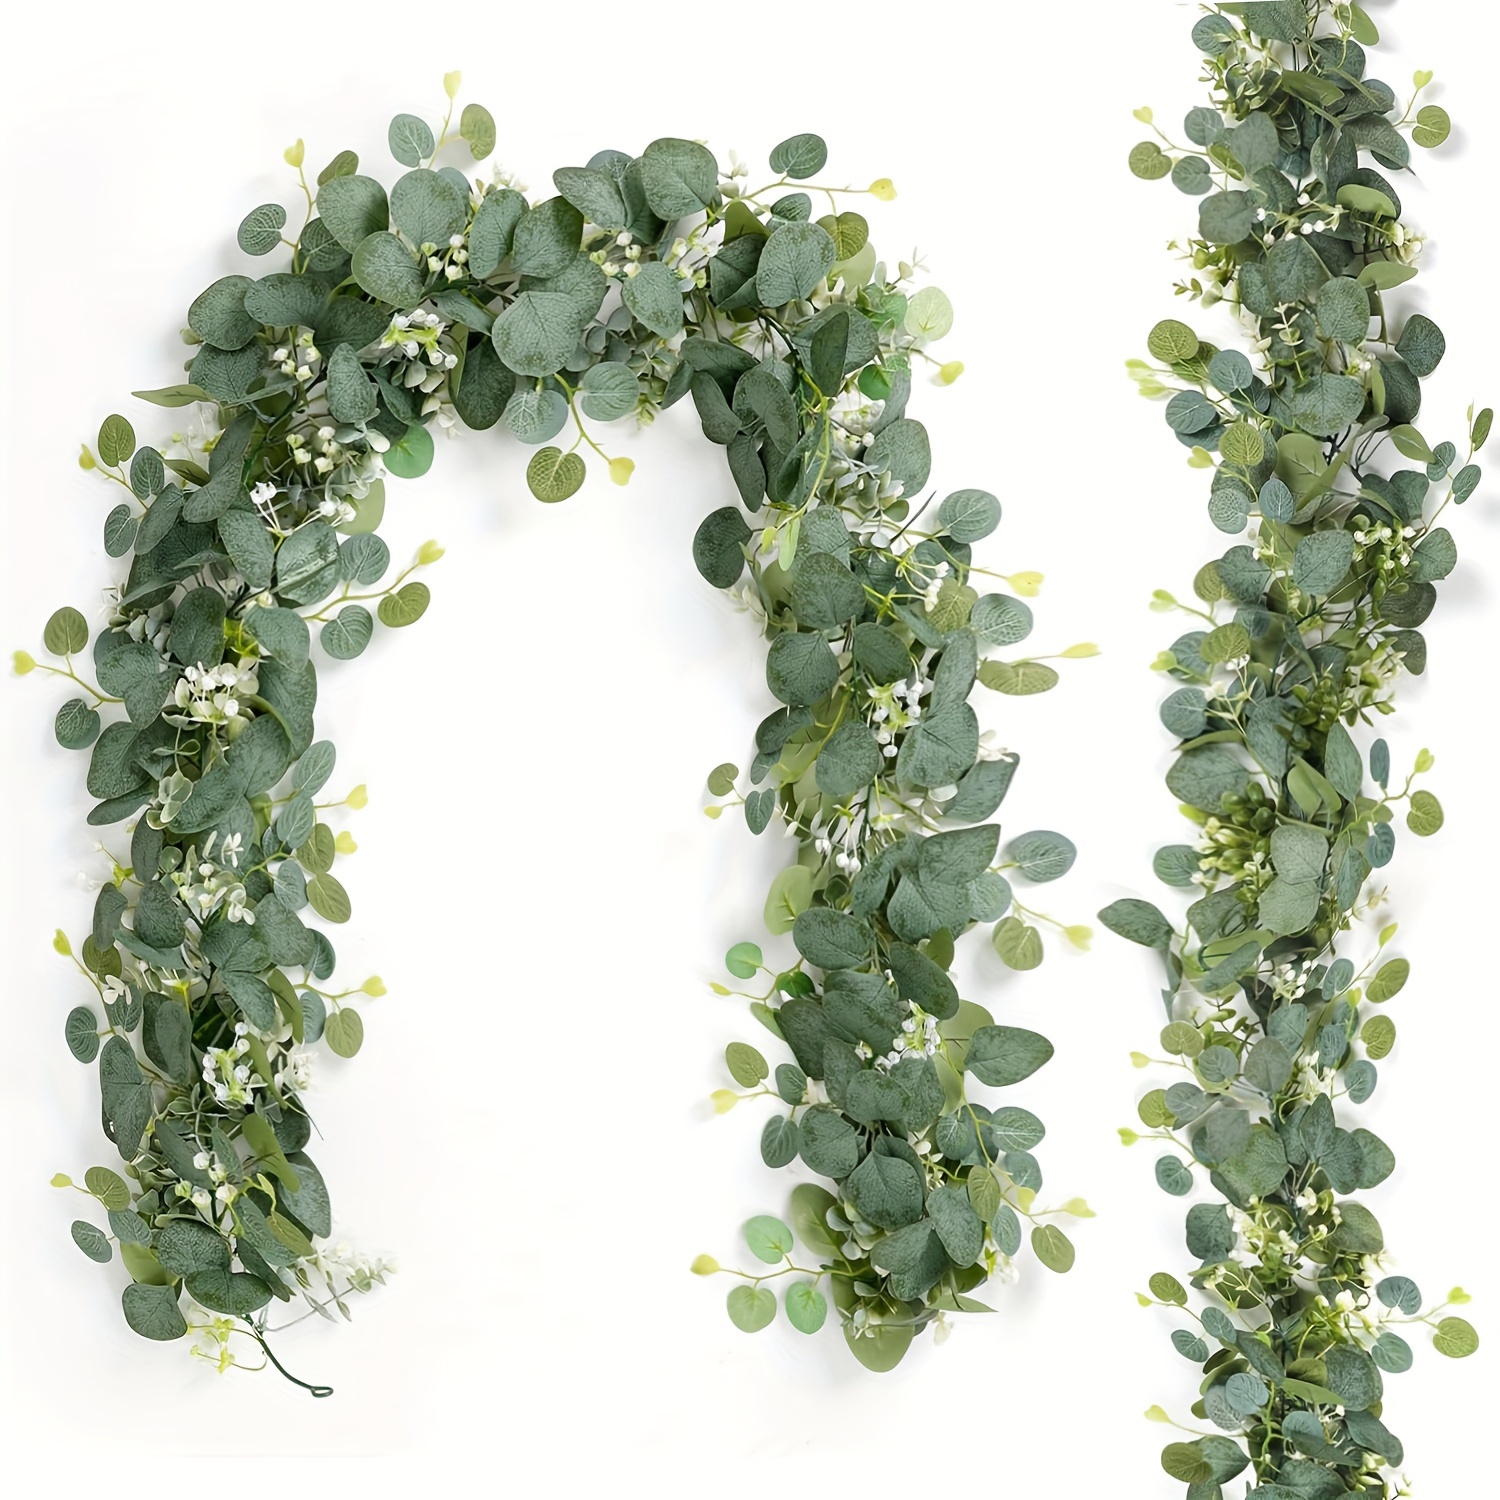 

Artificial Seeded Eucalyptus Spring Garland, 6.5ft 2pcs Faux Eucalyptus Leaves Greenery Hanging Vine Table Runner Wedding Backdrop Mantel Doorway Home Party Wall Decoration